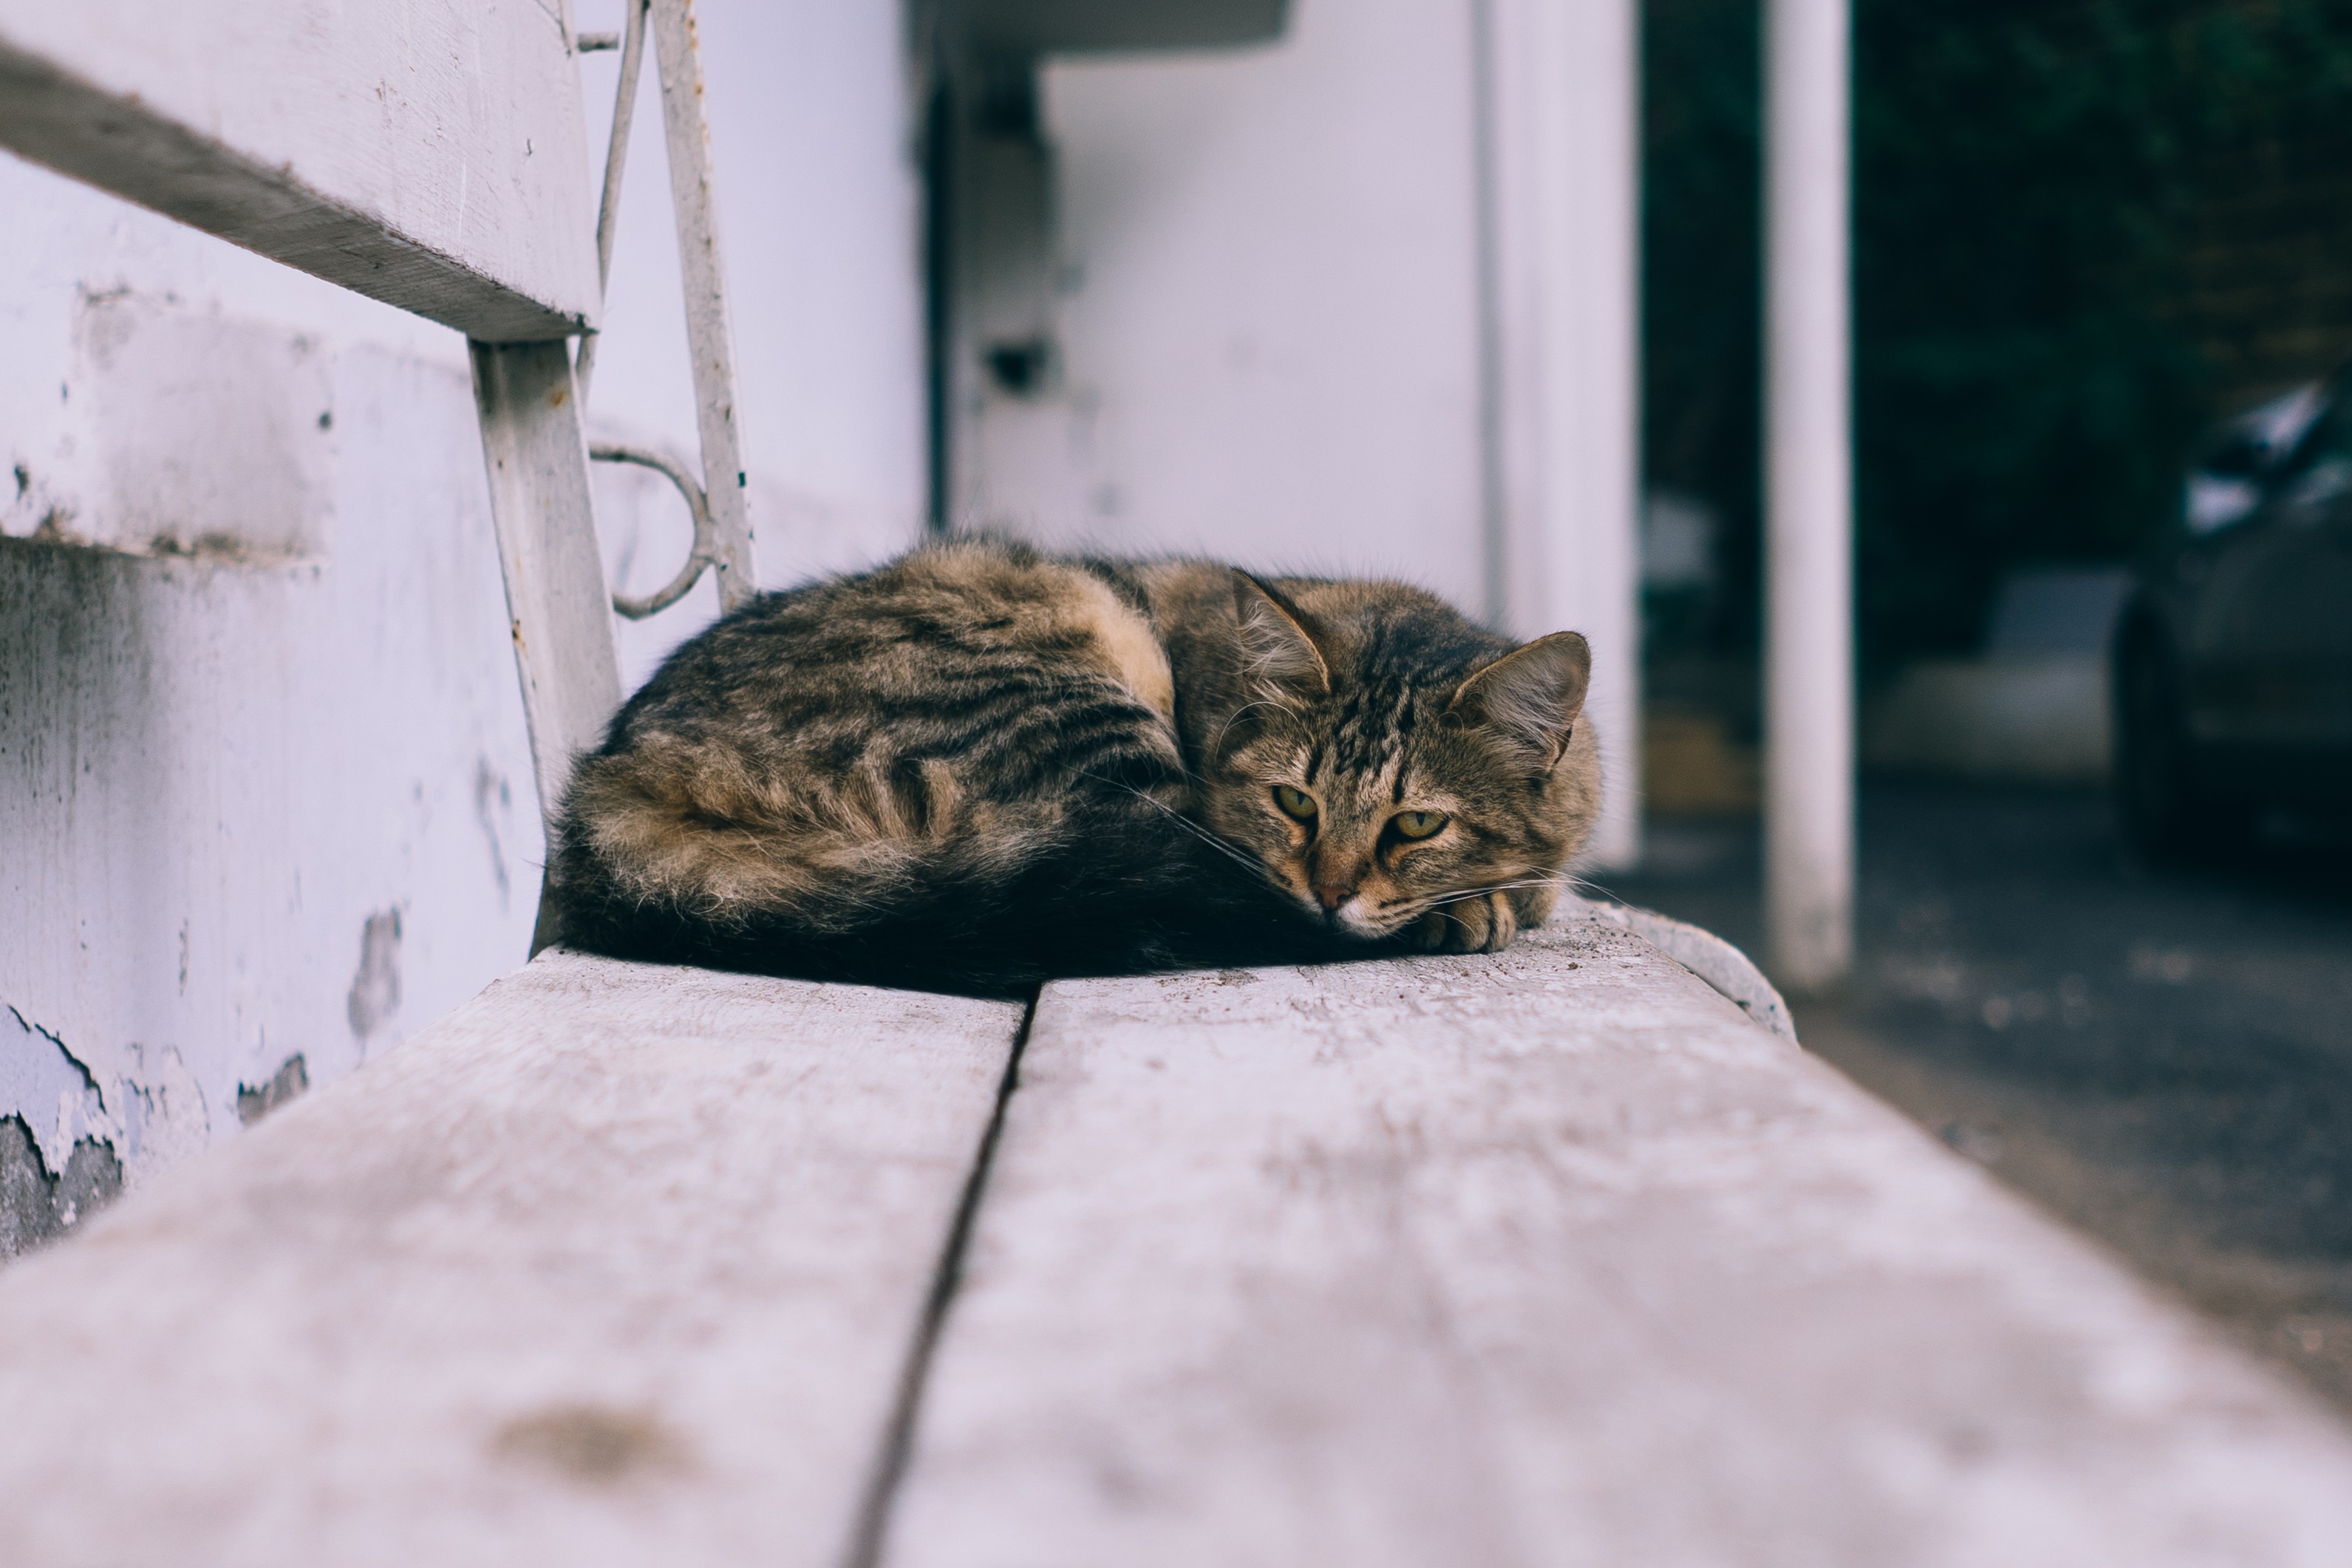 General 3183x2122 photography effects cats outdoors bench animals